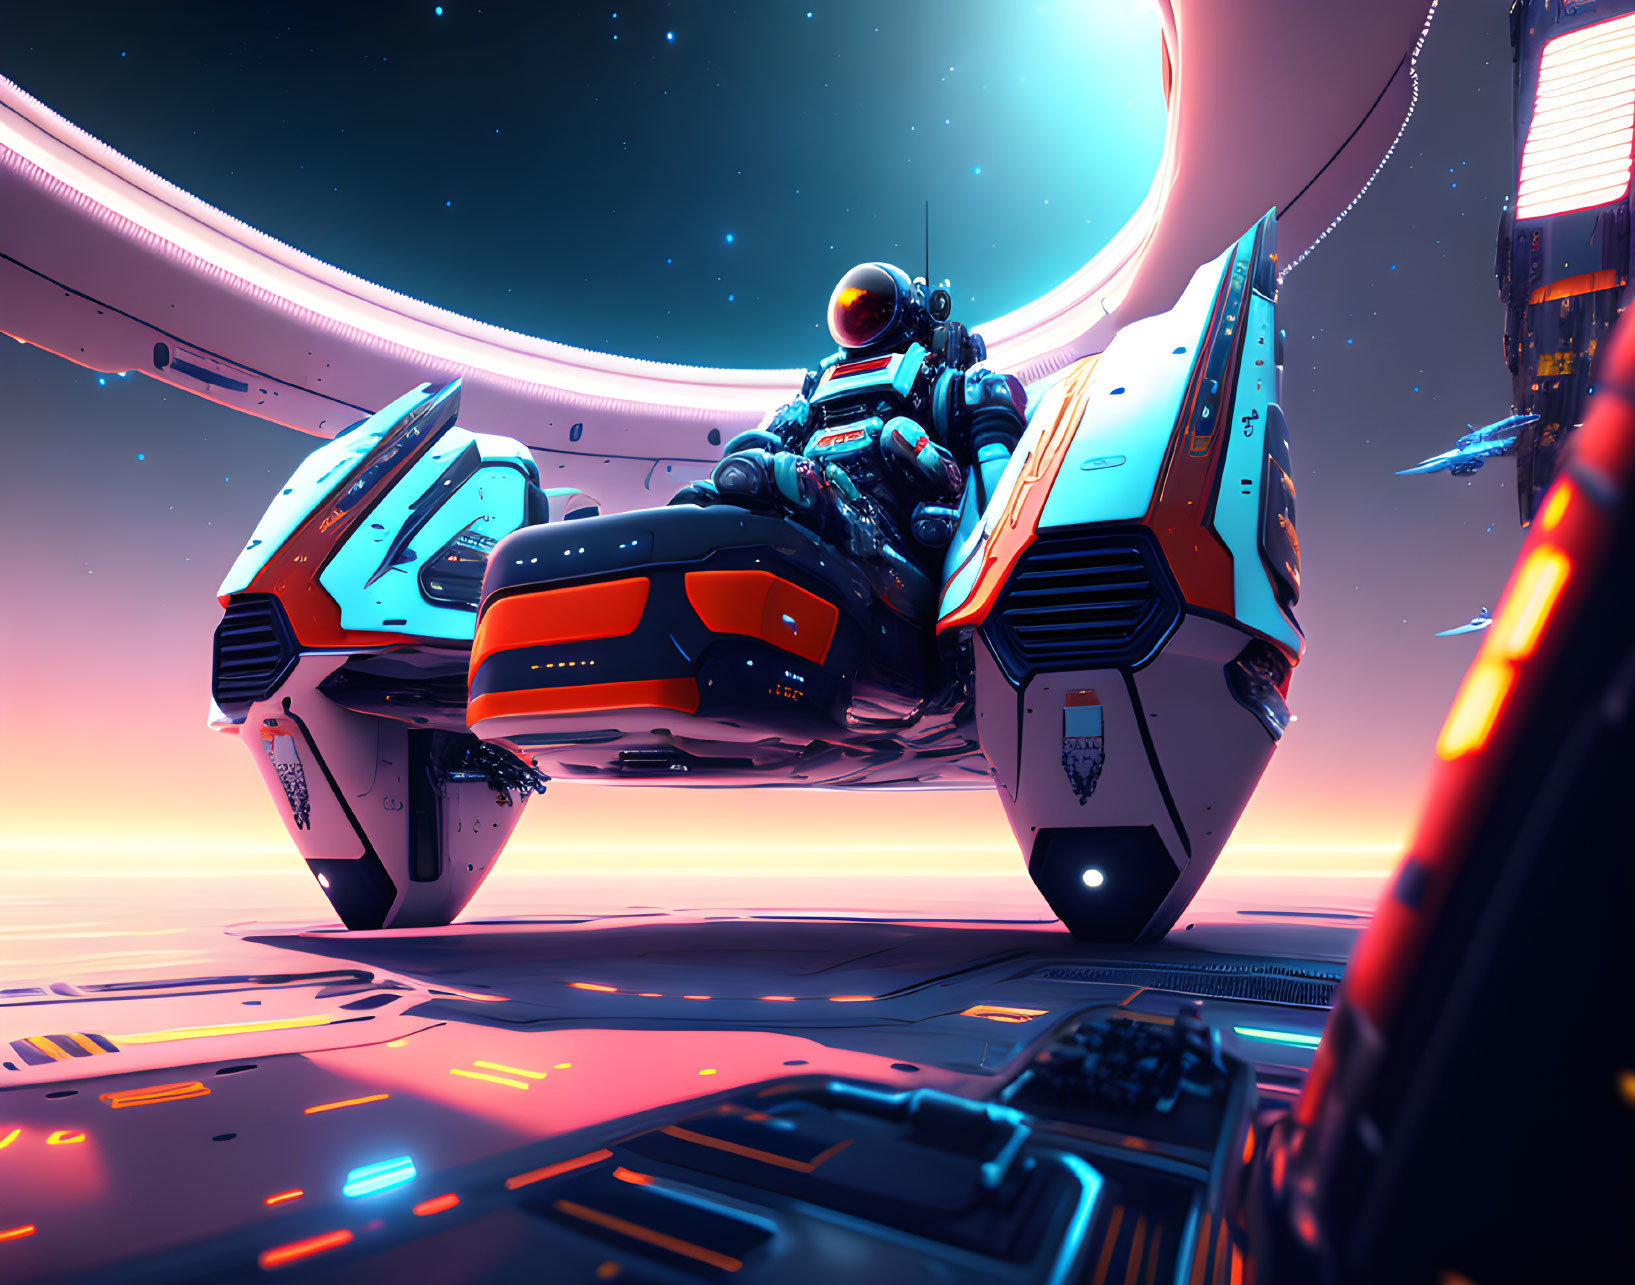 Futuristic astronaut on motorcycle at spaceport with vibrant sunset and ringed planet